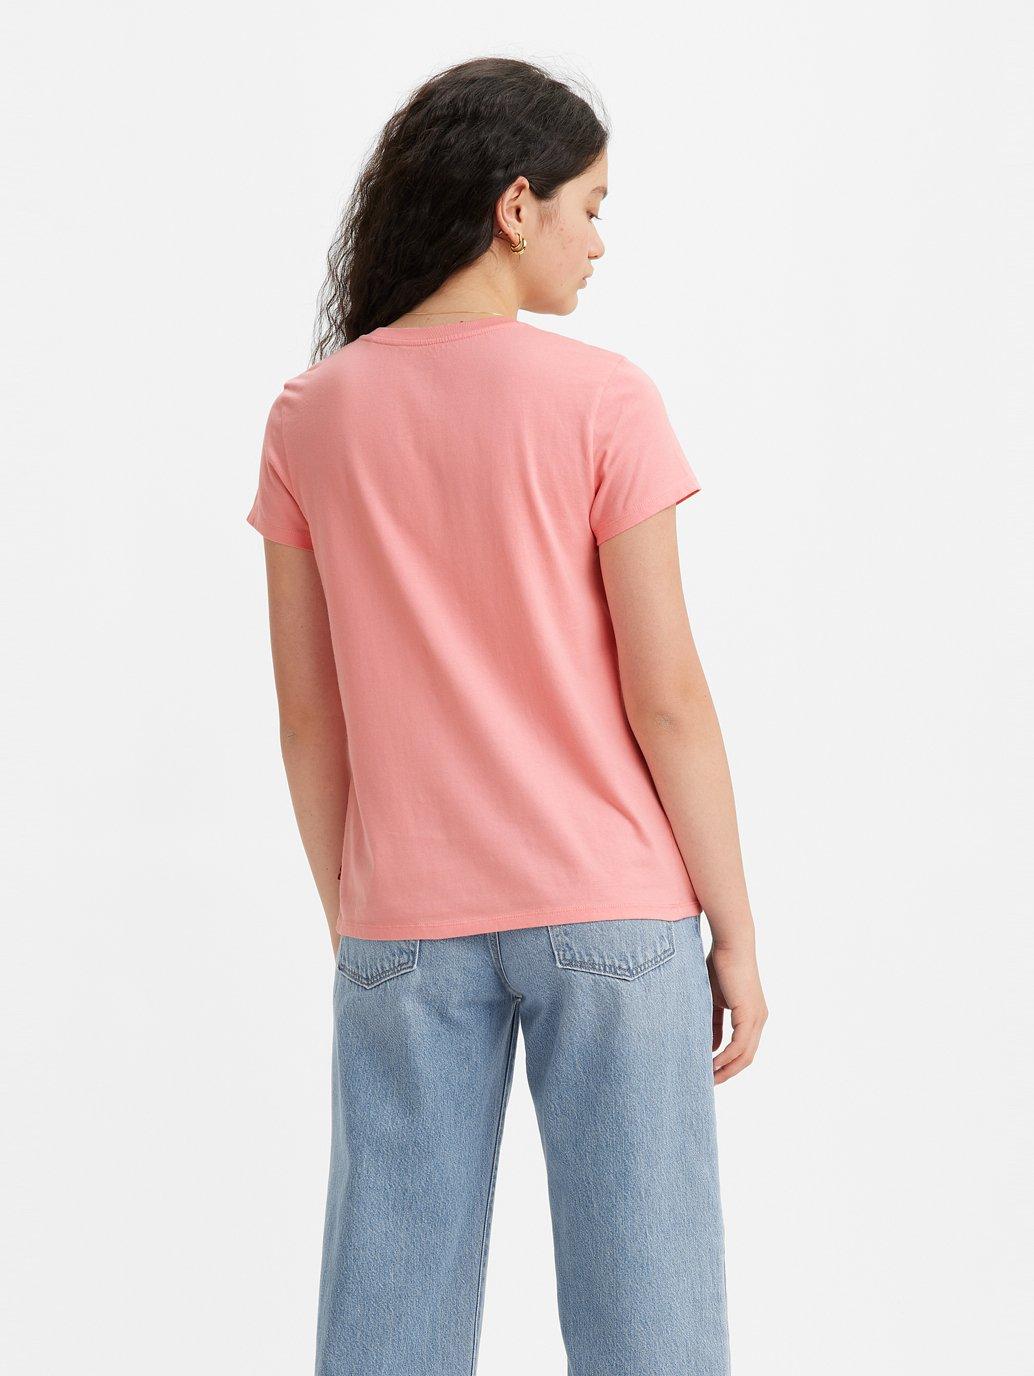 Buy Levi's® Women's Perfect Tee | Levis® Official Online Store MY